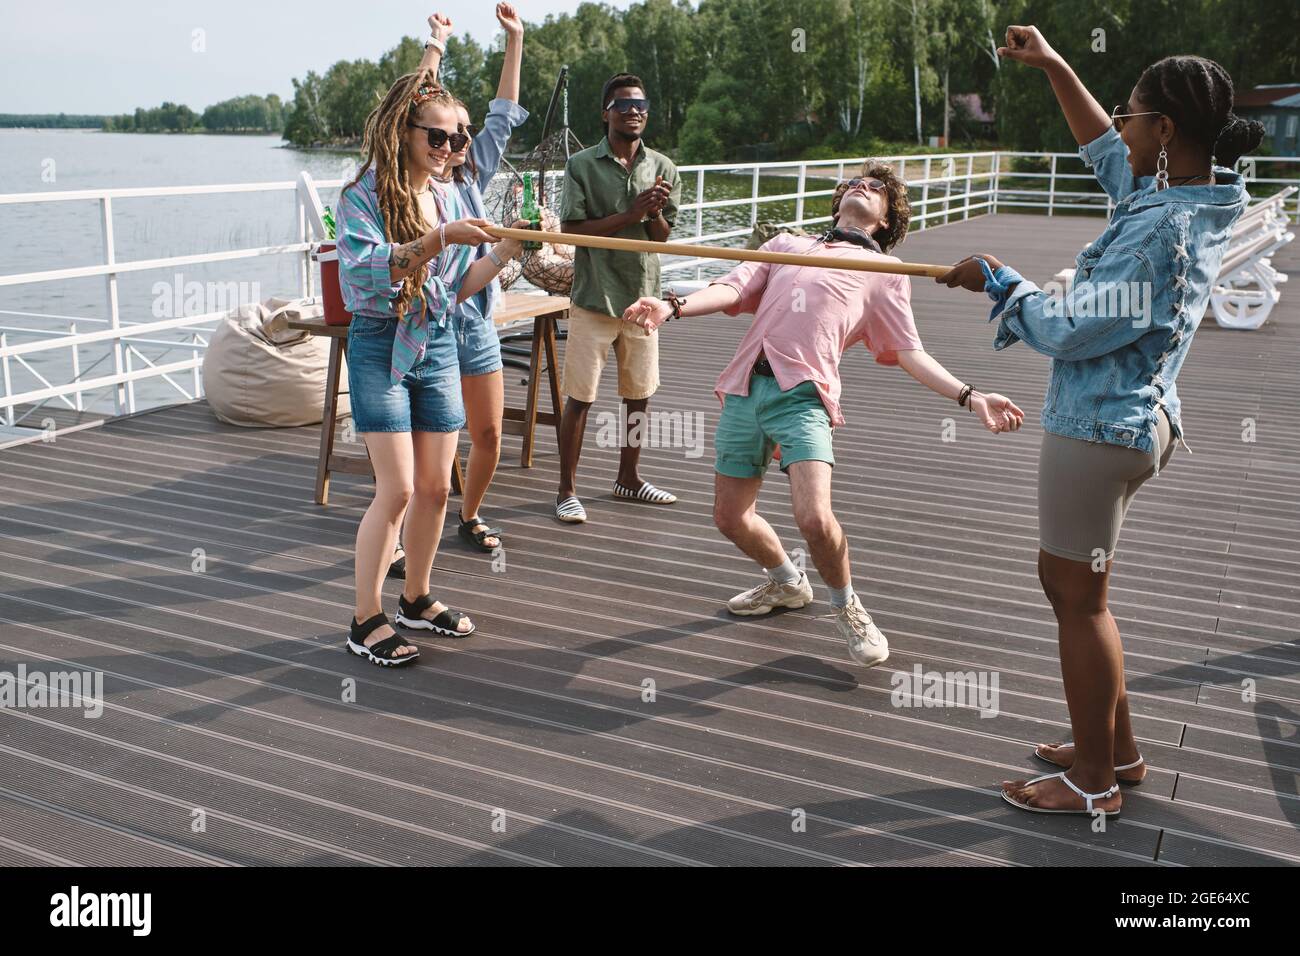 Friends cheering for young man bending backwards to walk under vertical bar  playing limbo Stock Photo - Alamy